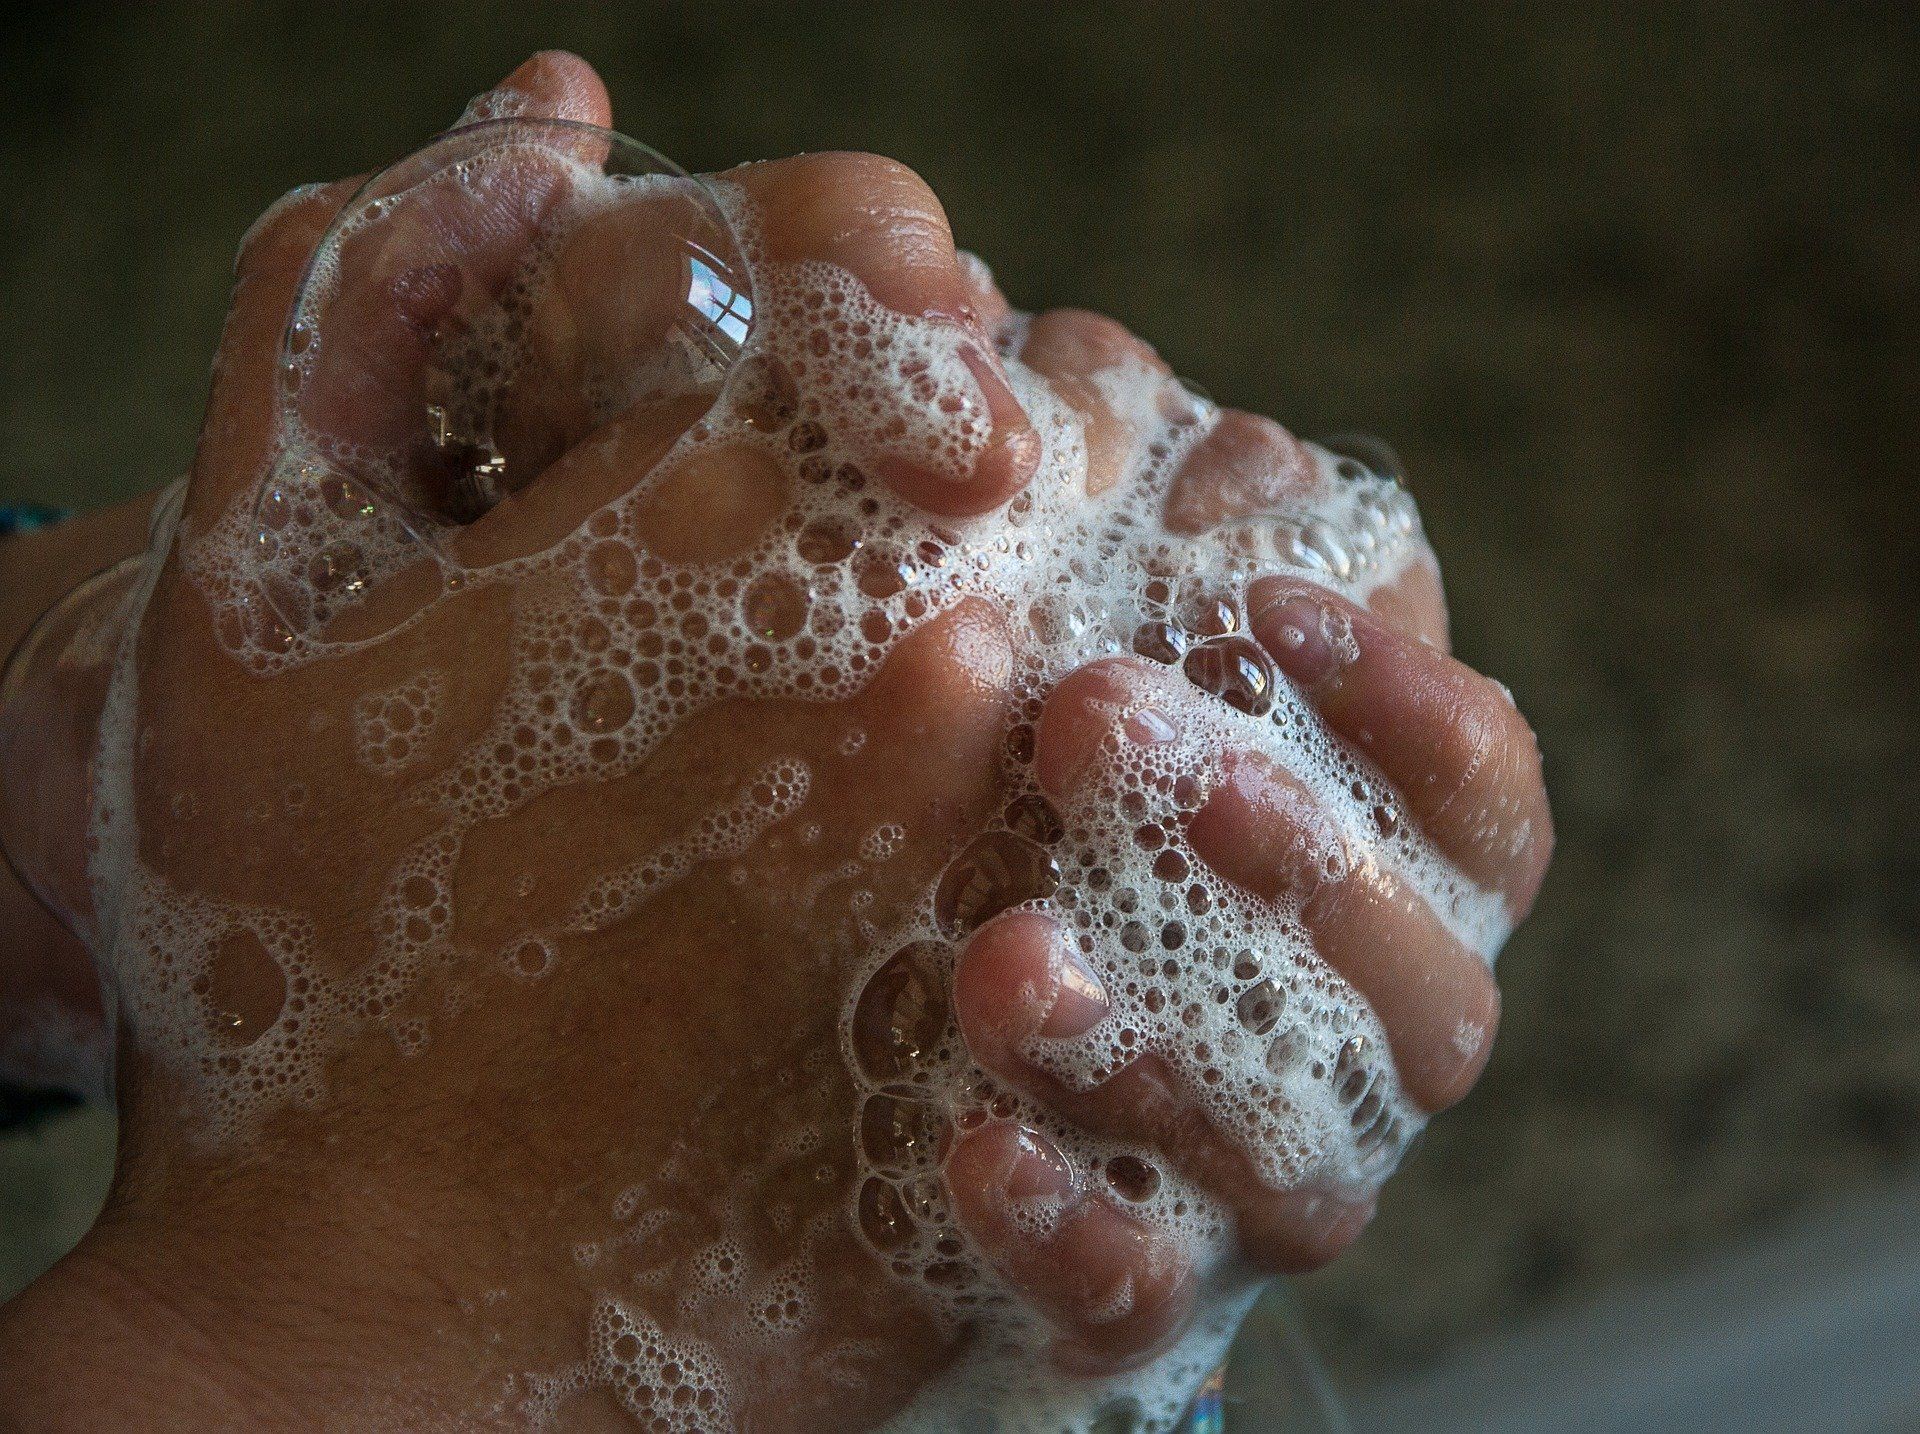 person washing hands with soap for OCD ritual